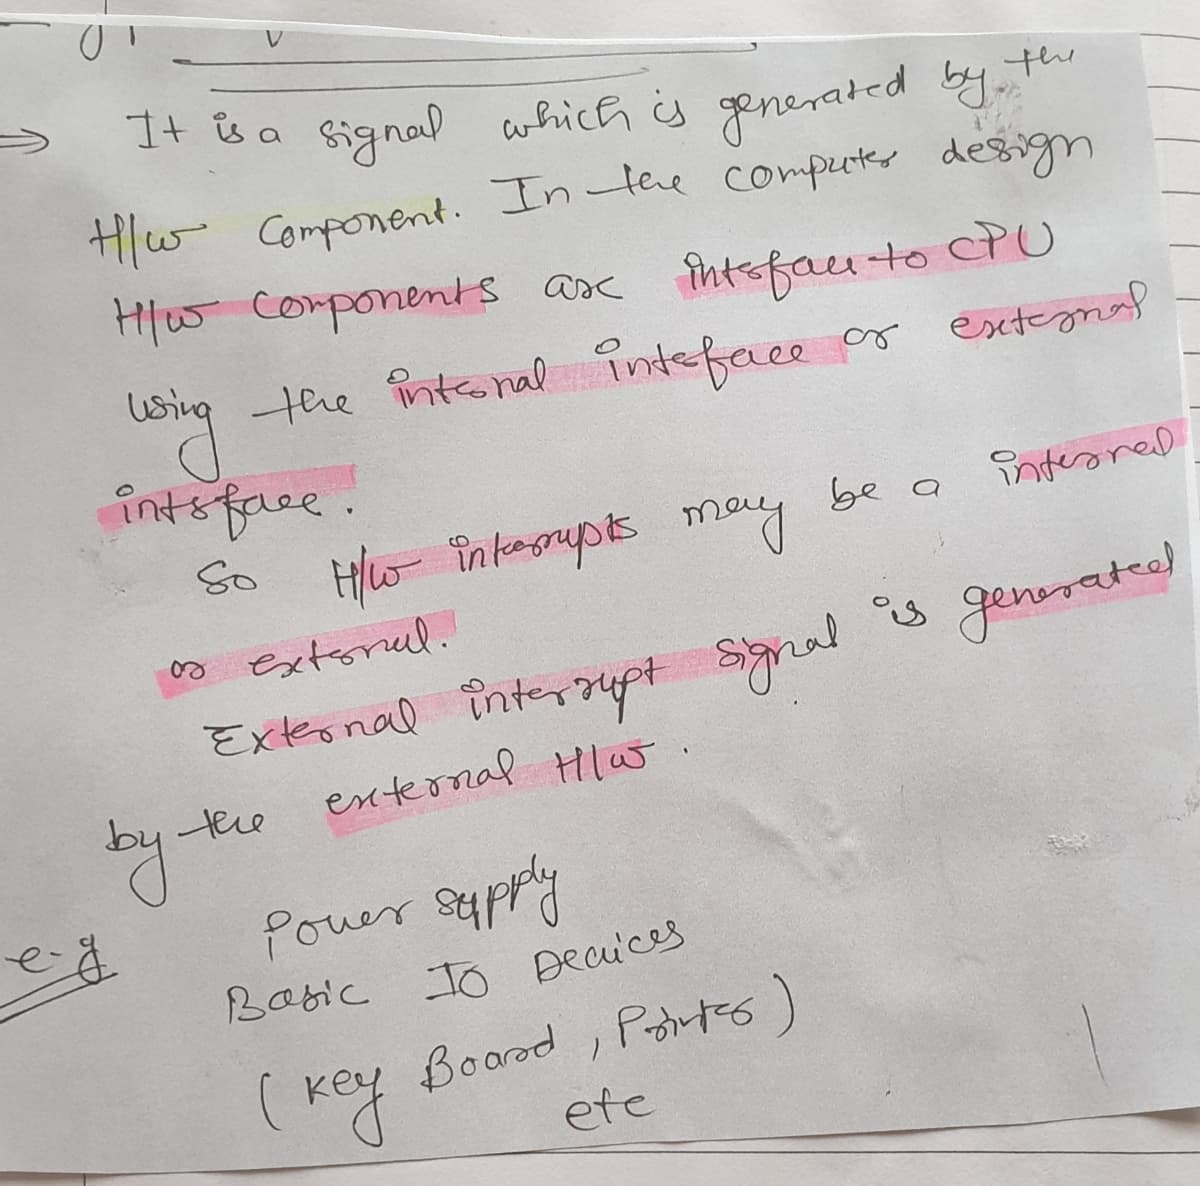 It is a signal which s generated by
the
Hlw Component. In the comperter design
Hlw components
asc intofacu to cPU
the intonal înteface or extegmal
intsface.
So
Hw inkesgrupts may
be a
inteared
Extorul.
generatea)
External înterrupt synal
external Hlw.
tehe
Pouer sappy
Babic Jo Decuces
Boorod , Podrtes)
ete
